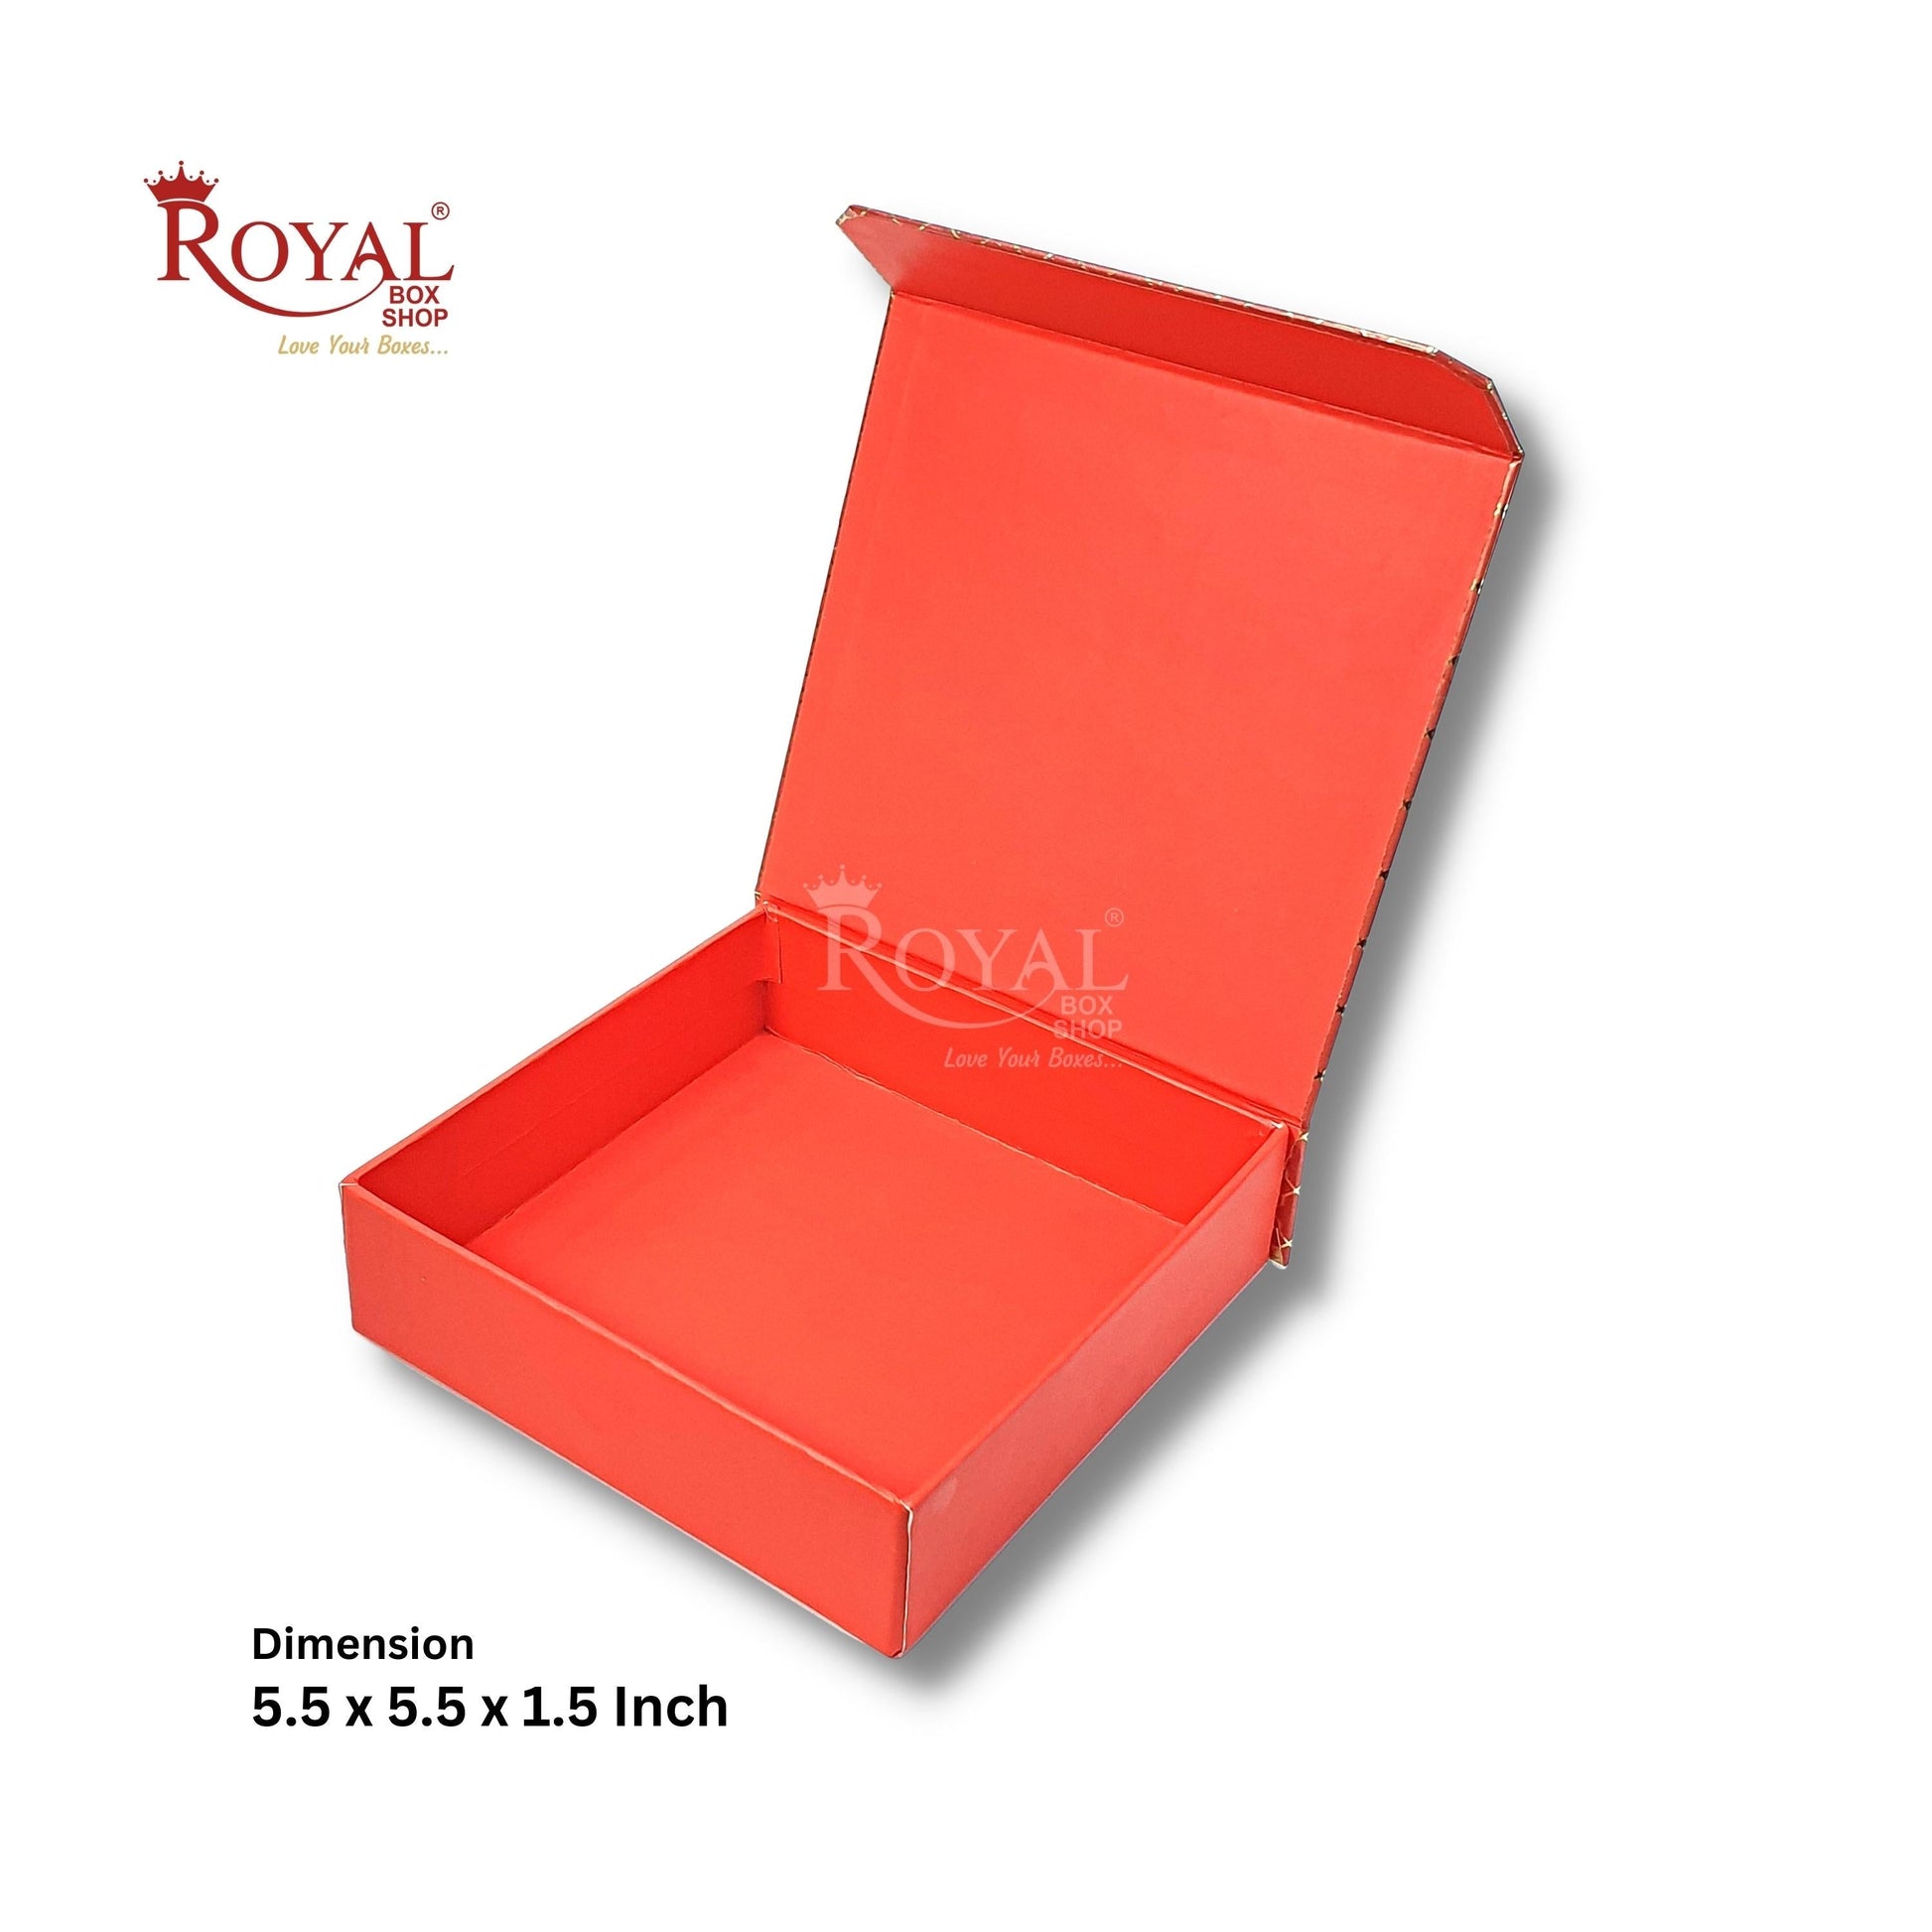 Rigid Chocolate Boxes 9 Cavity With Magnetic Flap I Red with Gold Foiling I 5.5 X 5.5 X 1.5 Inch Royal Box Shop